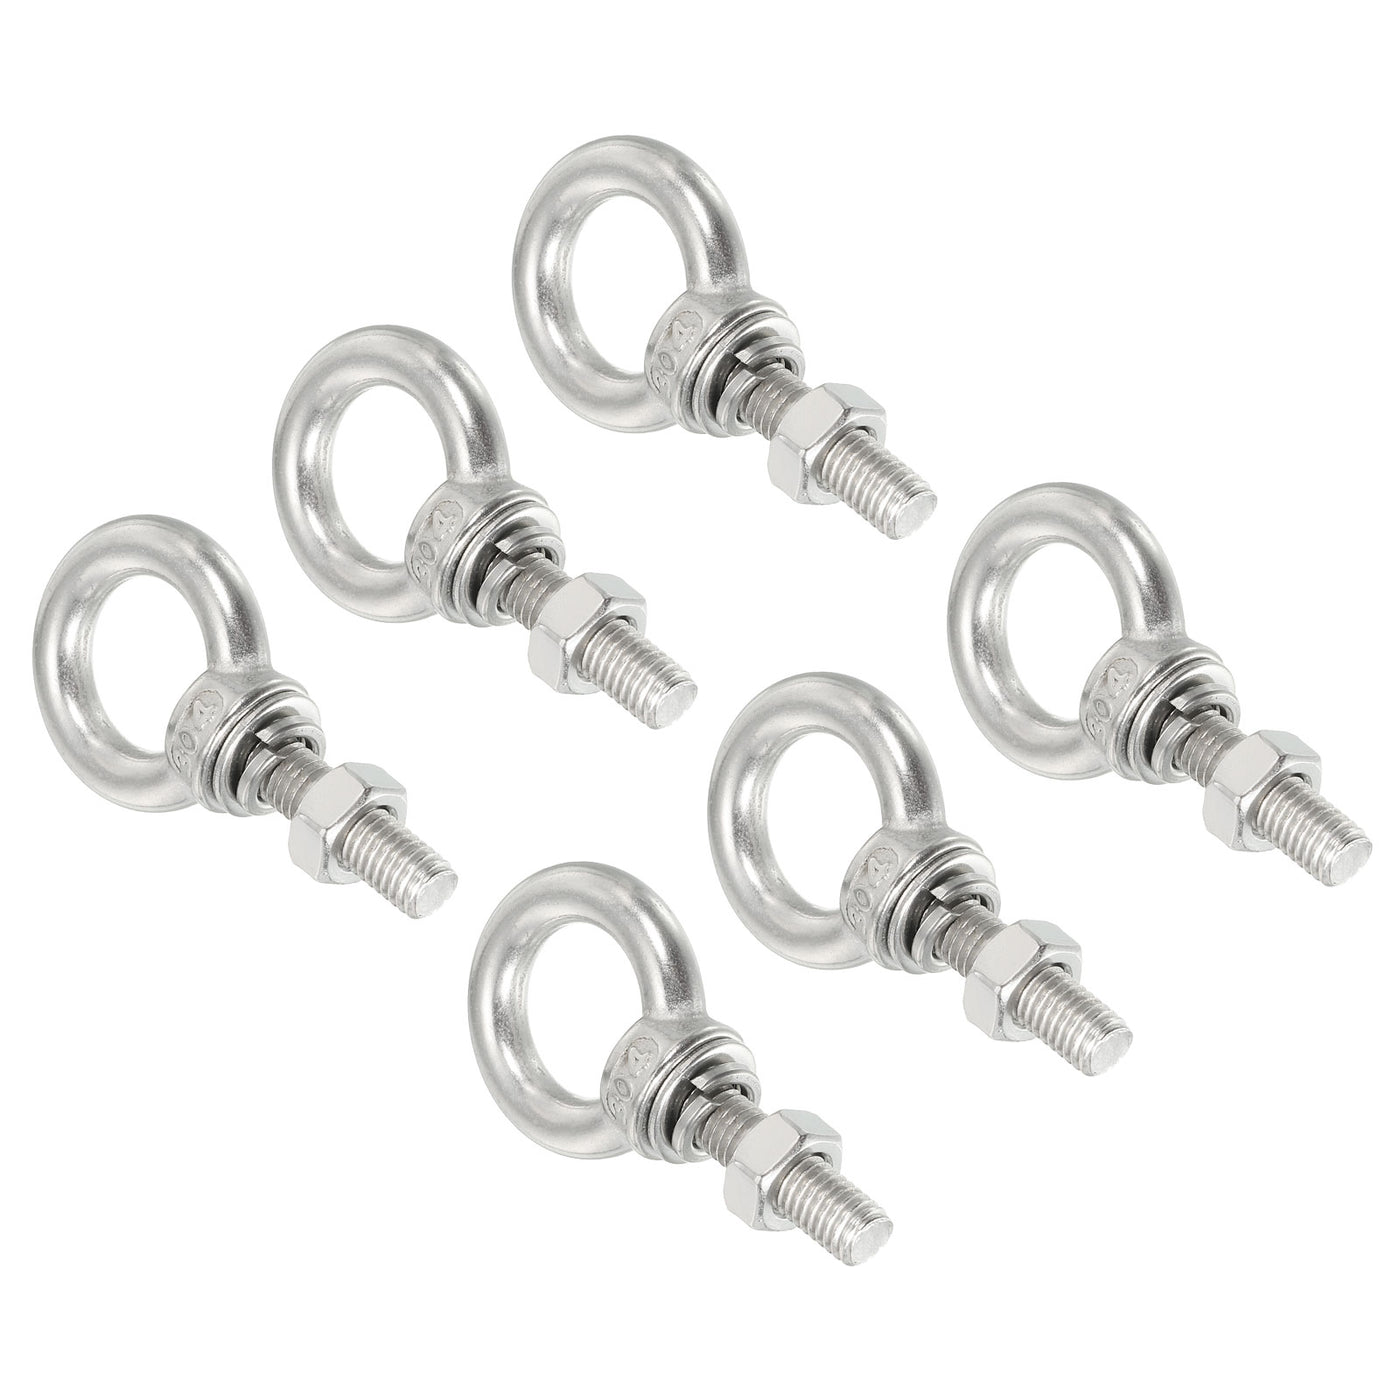 uxcell Uxcell M8x30 5/16"x1.18" Stainless Steel Eye Bolts Threaded Screw Eyebolt Shoulder Ring with Nuts Washers for Lifting Hanging, 6 Set